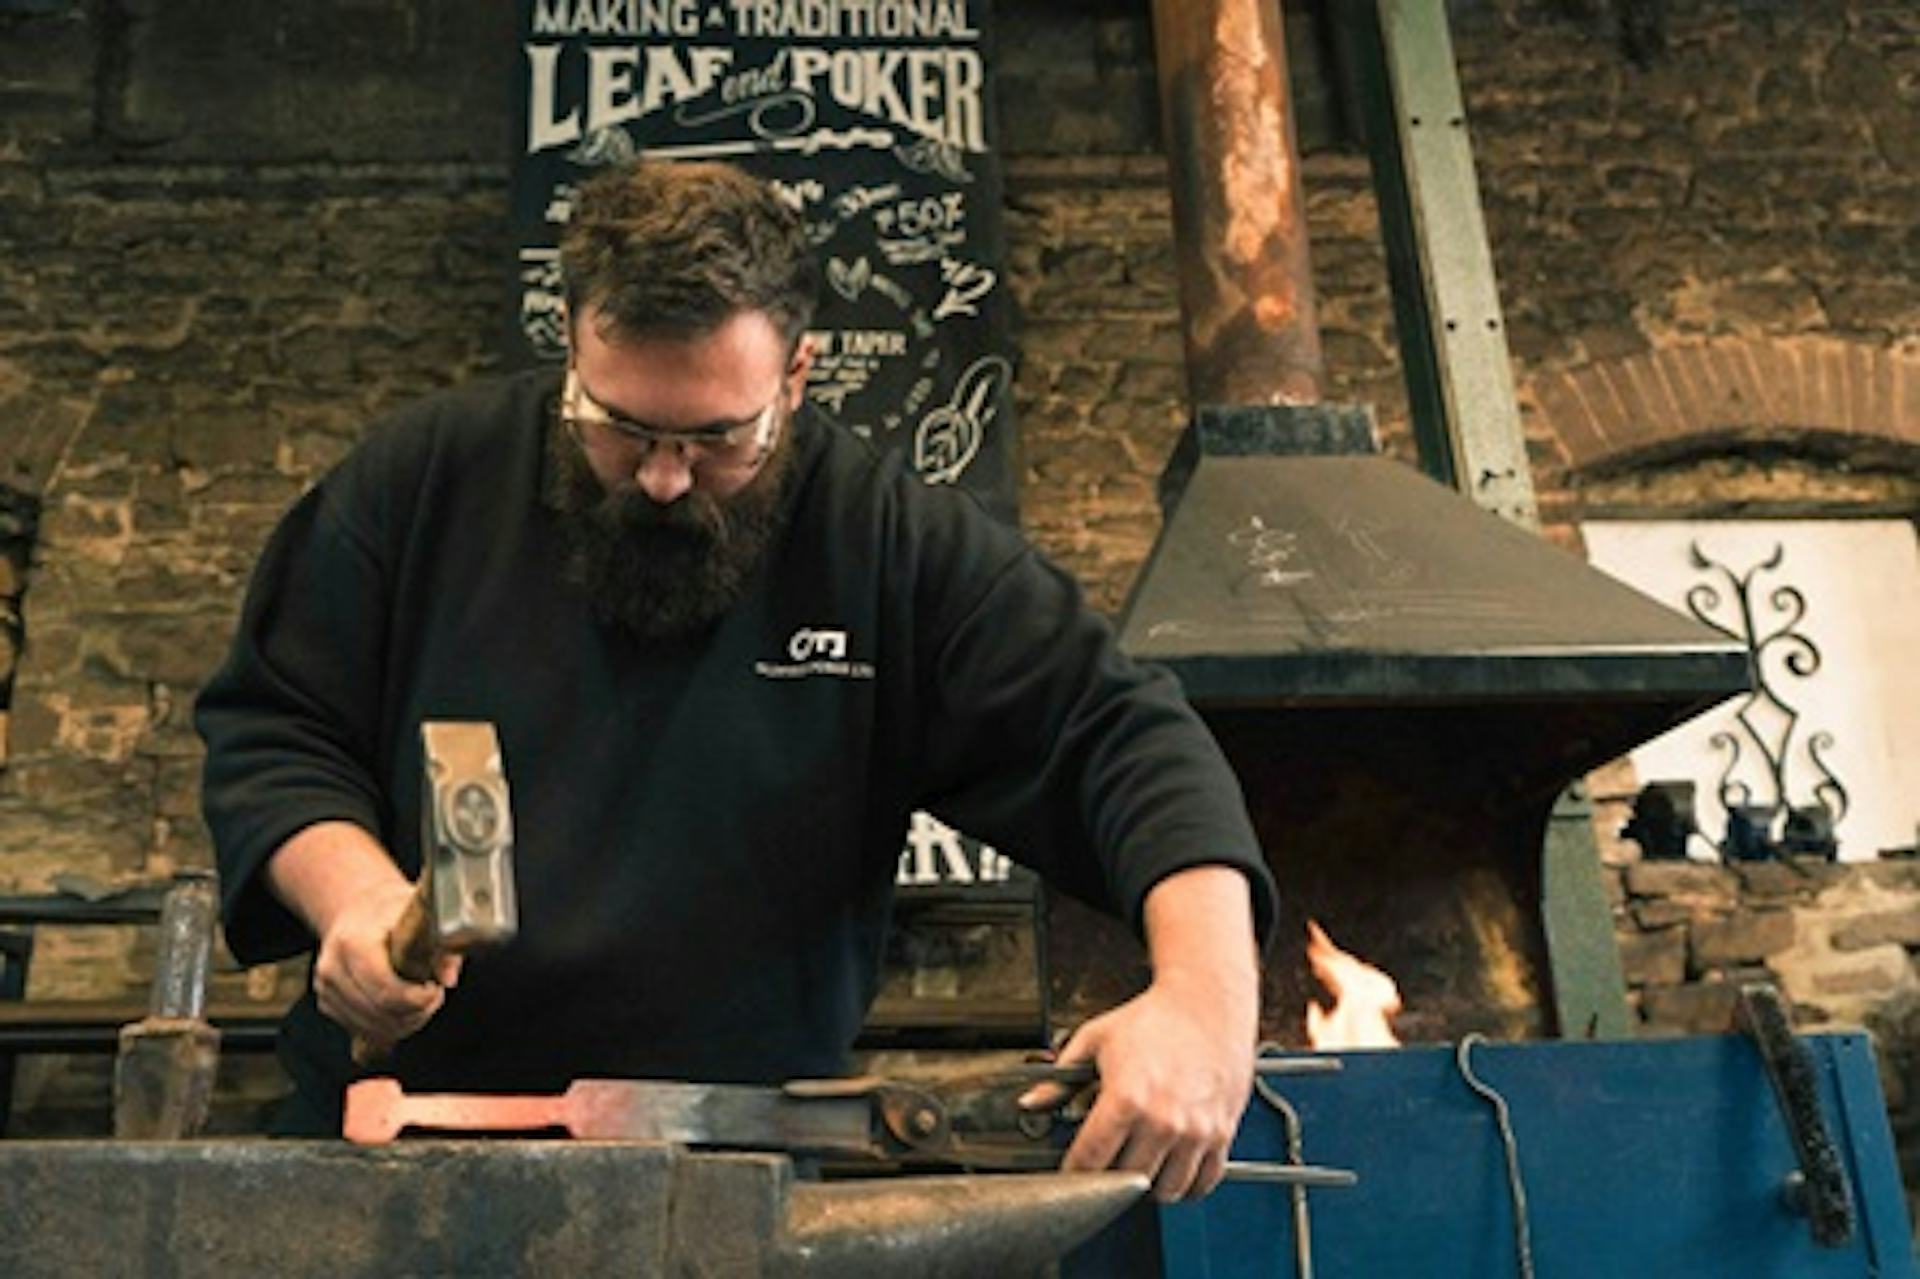 Children’s Introduction to Blacksmithing Experience at Oldfield Forge